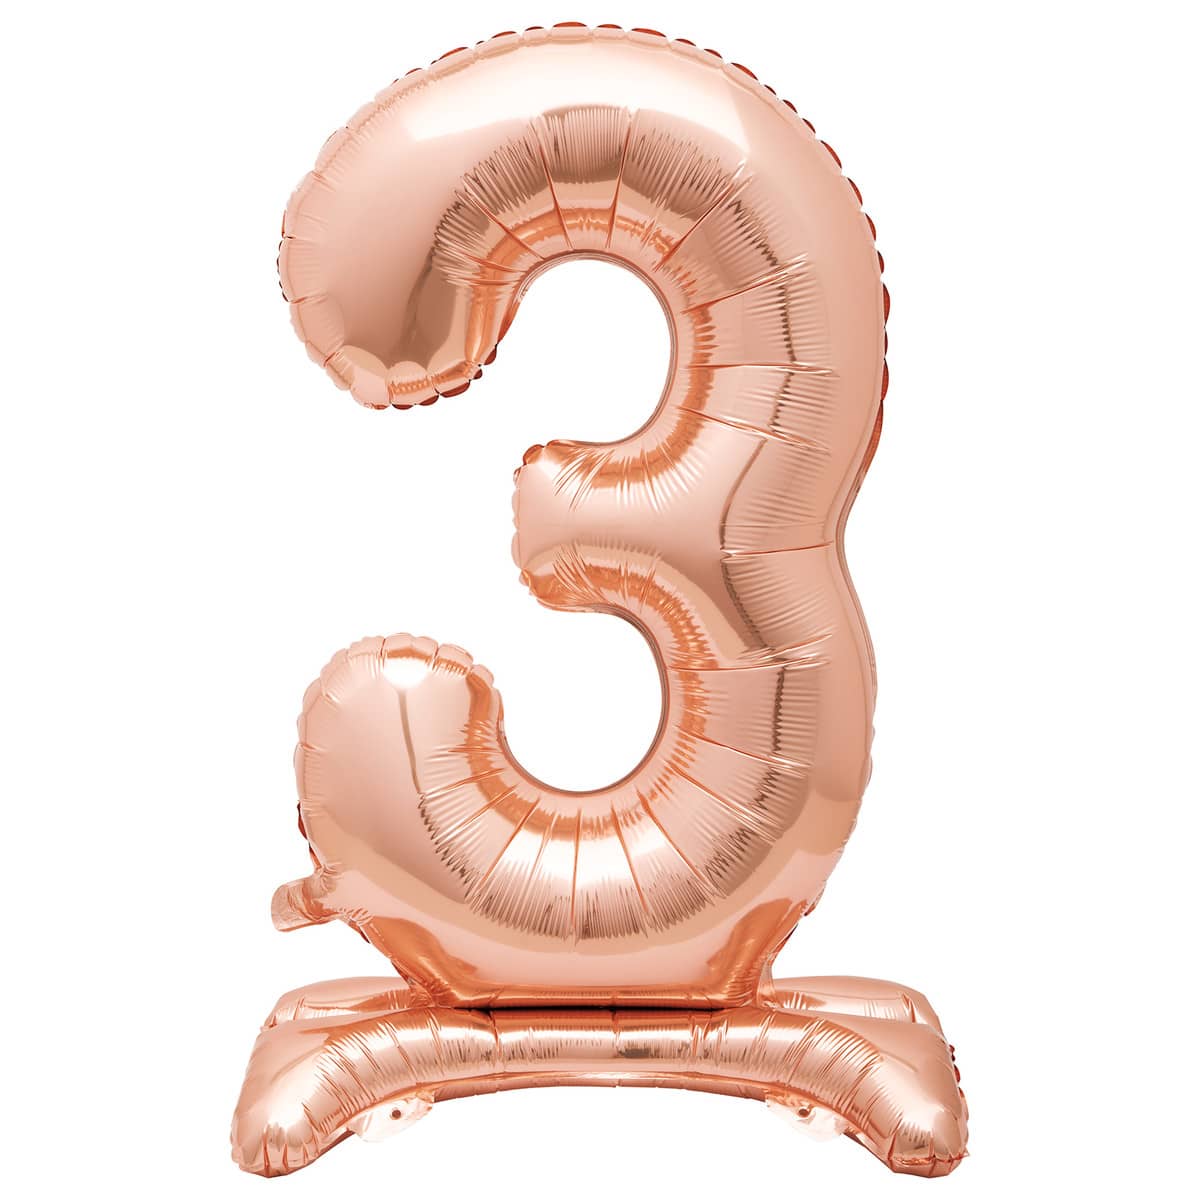 Rose Gold "3" Giant Standing Air Filled Numeral Foil Balloon 76CM (30") - Party Owls